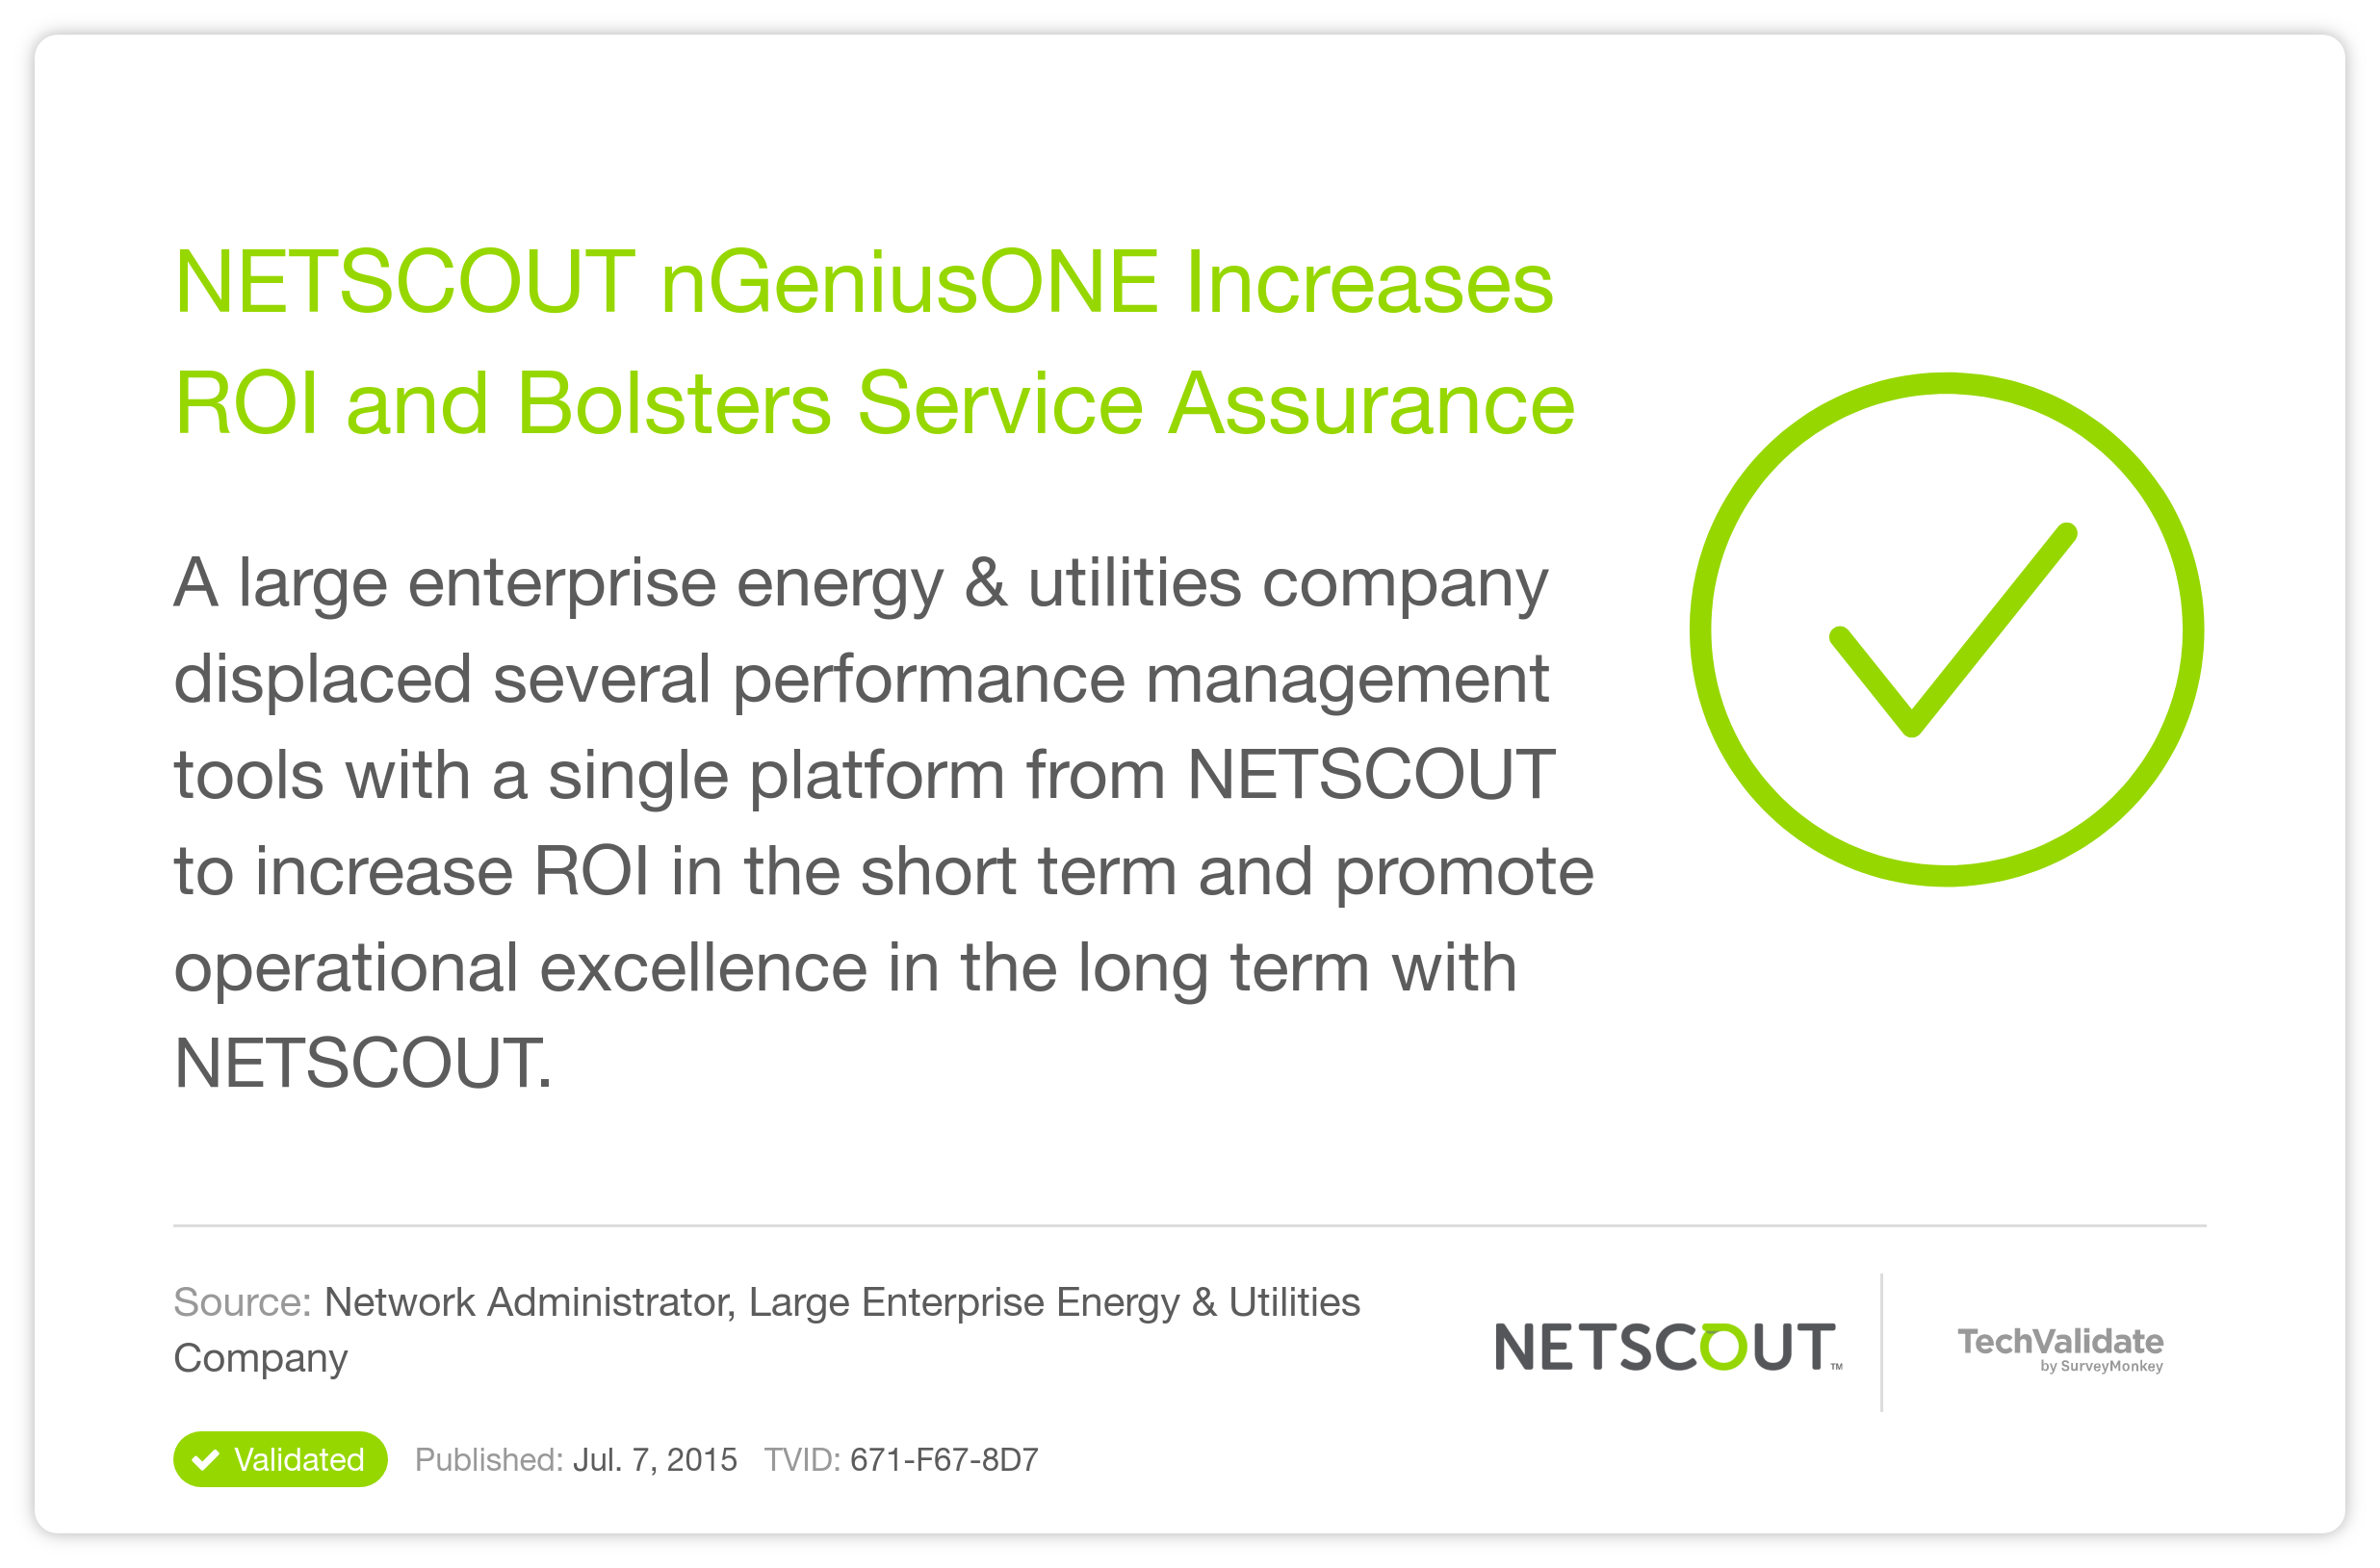 NETSCOUT nGeniusONE Increases ROI and Bolsters Service Assurance